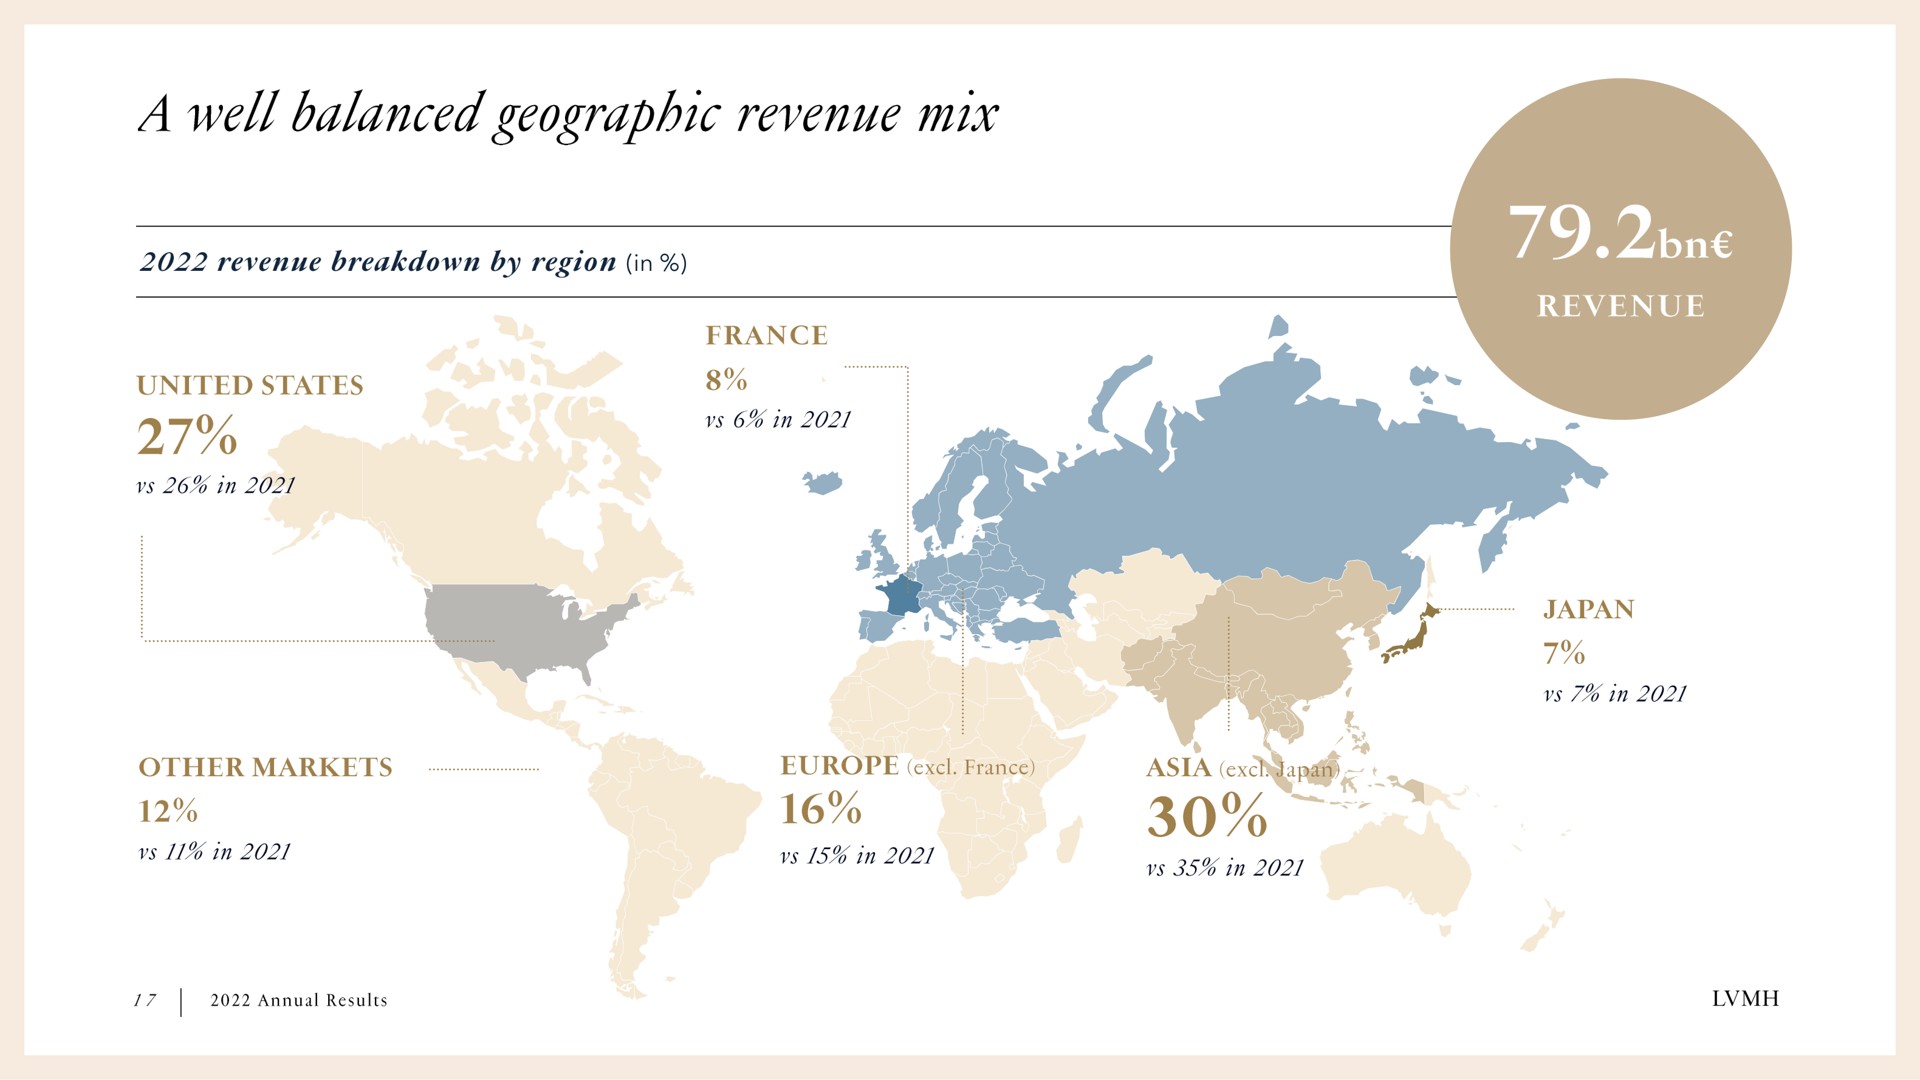 in a well balanced geographic revenue mix | LVMH